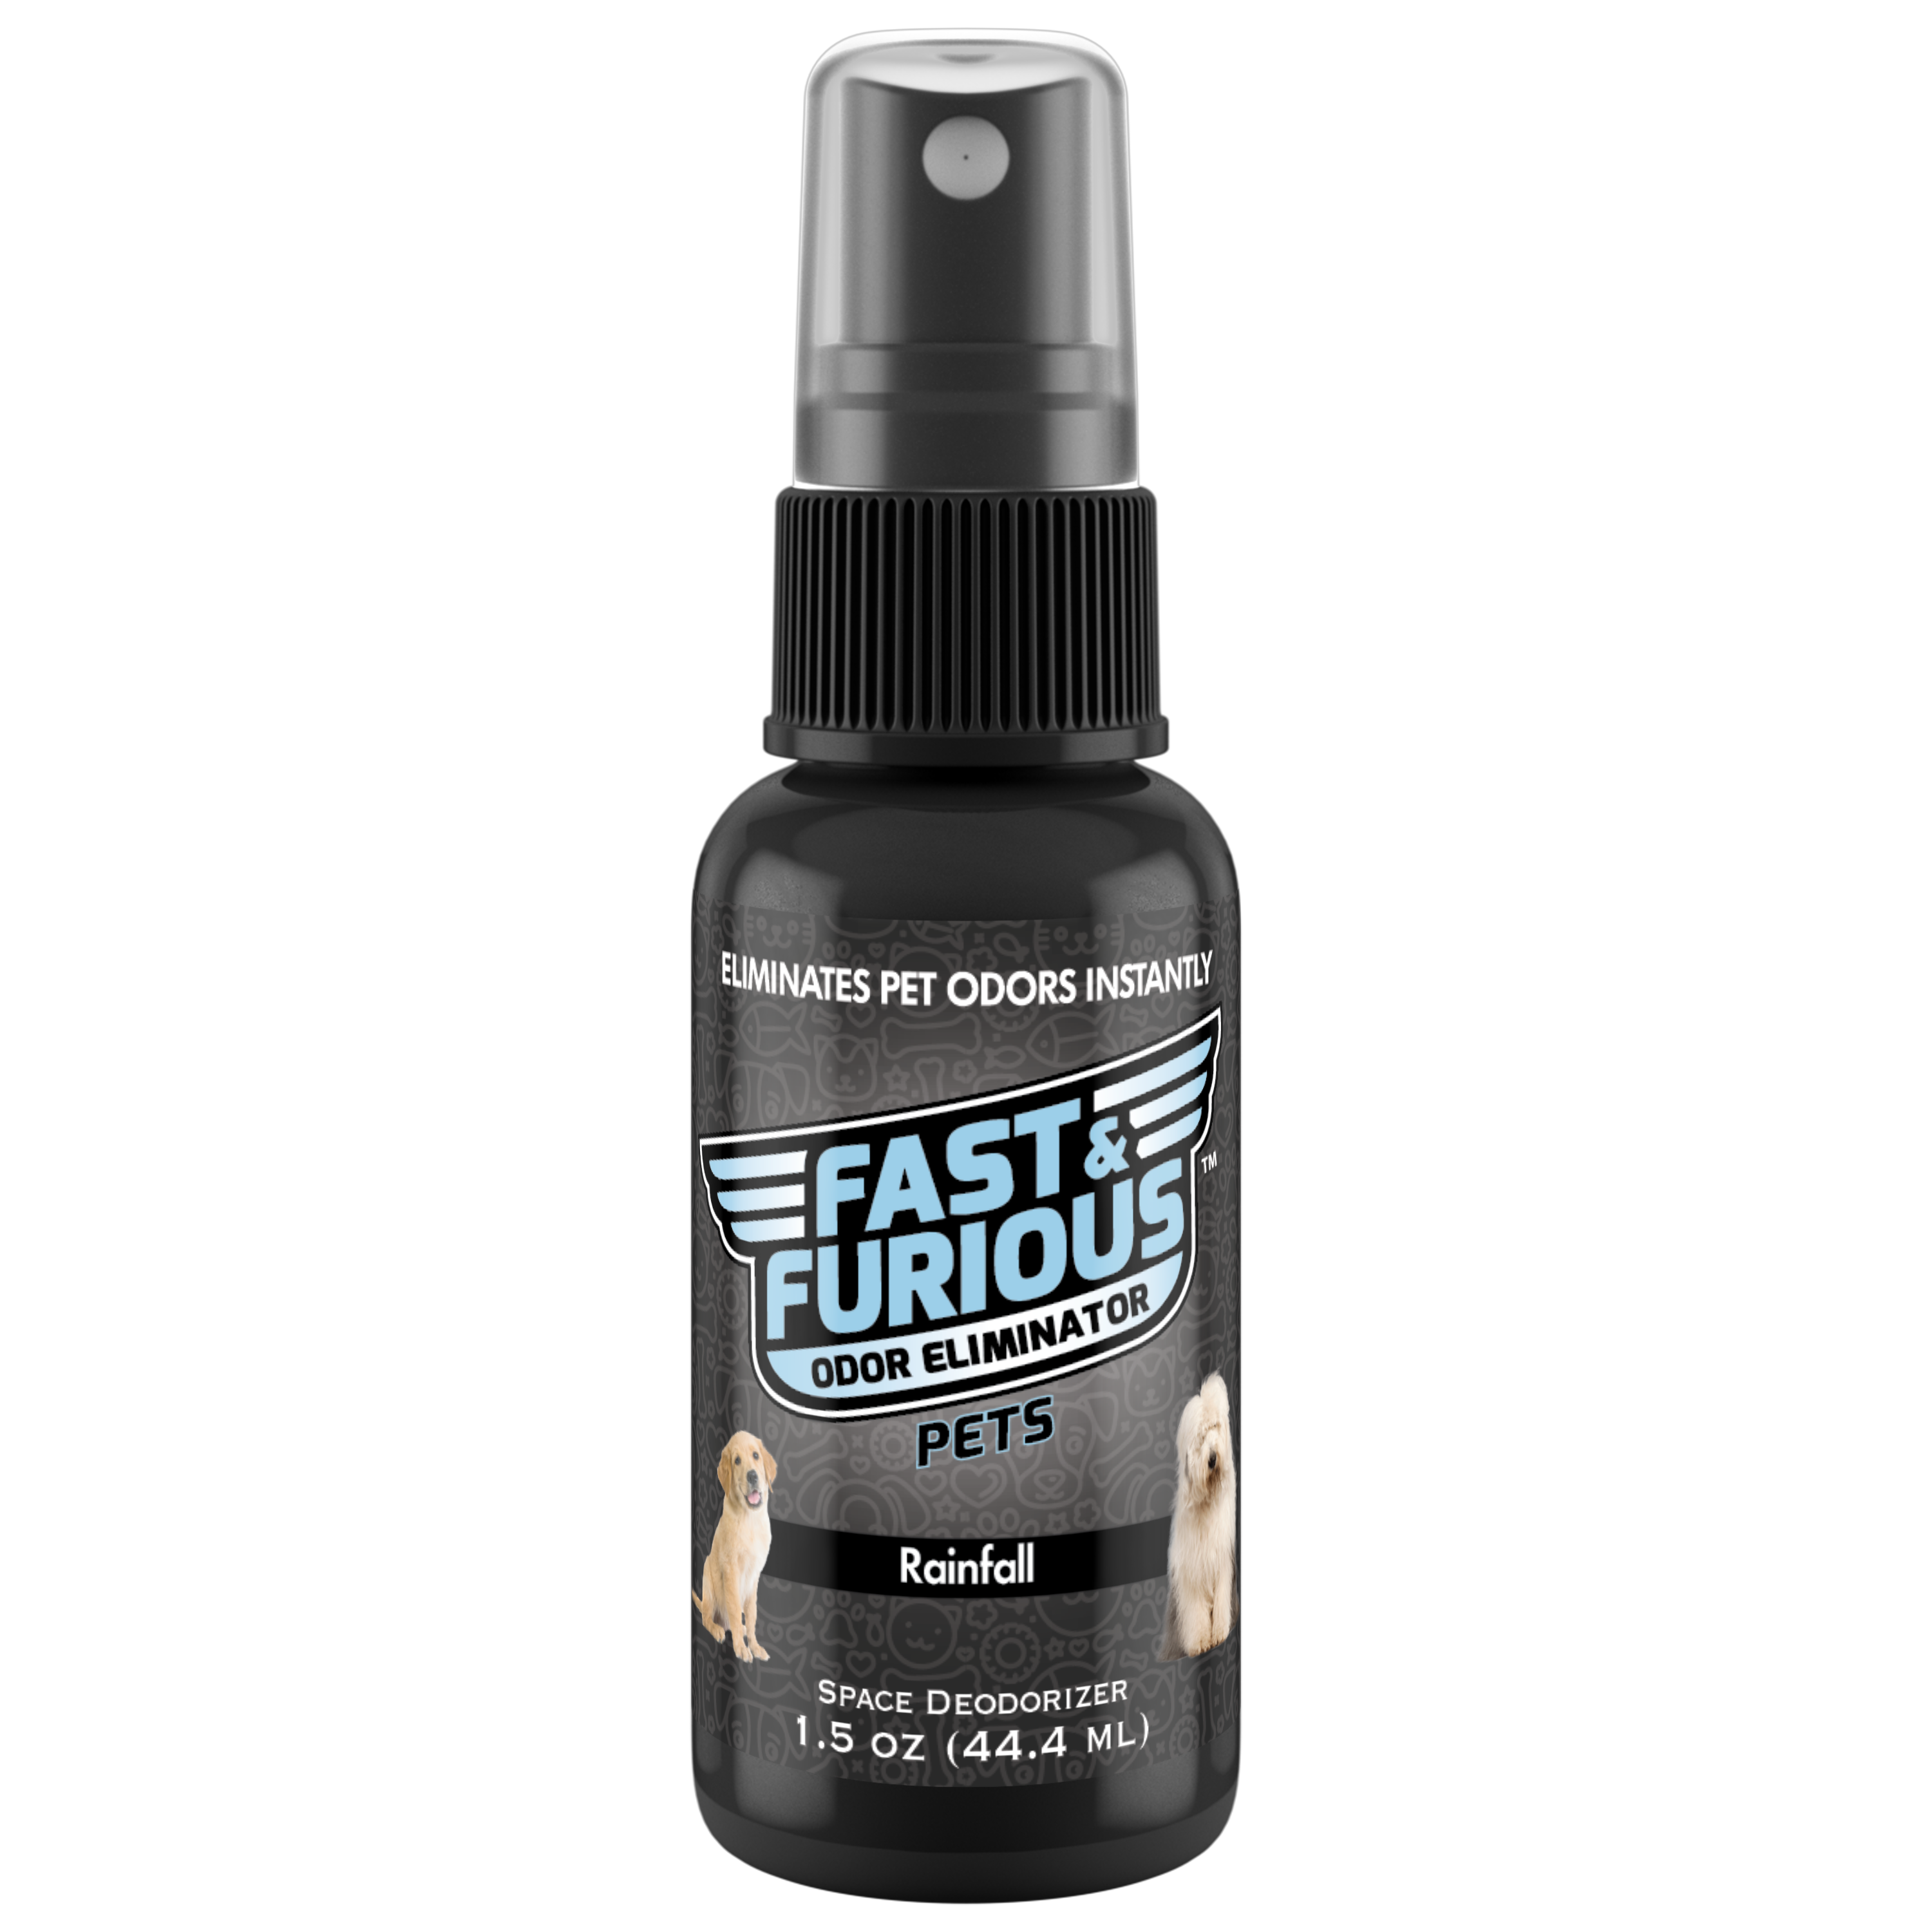 Fast and Furious Pets Odor Eliminator - Rainfall Scent